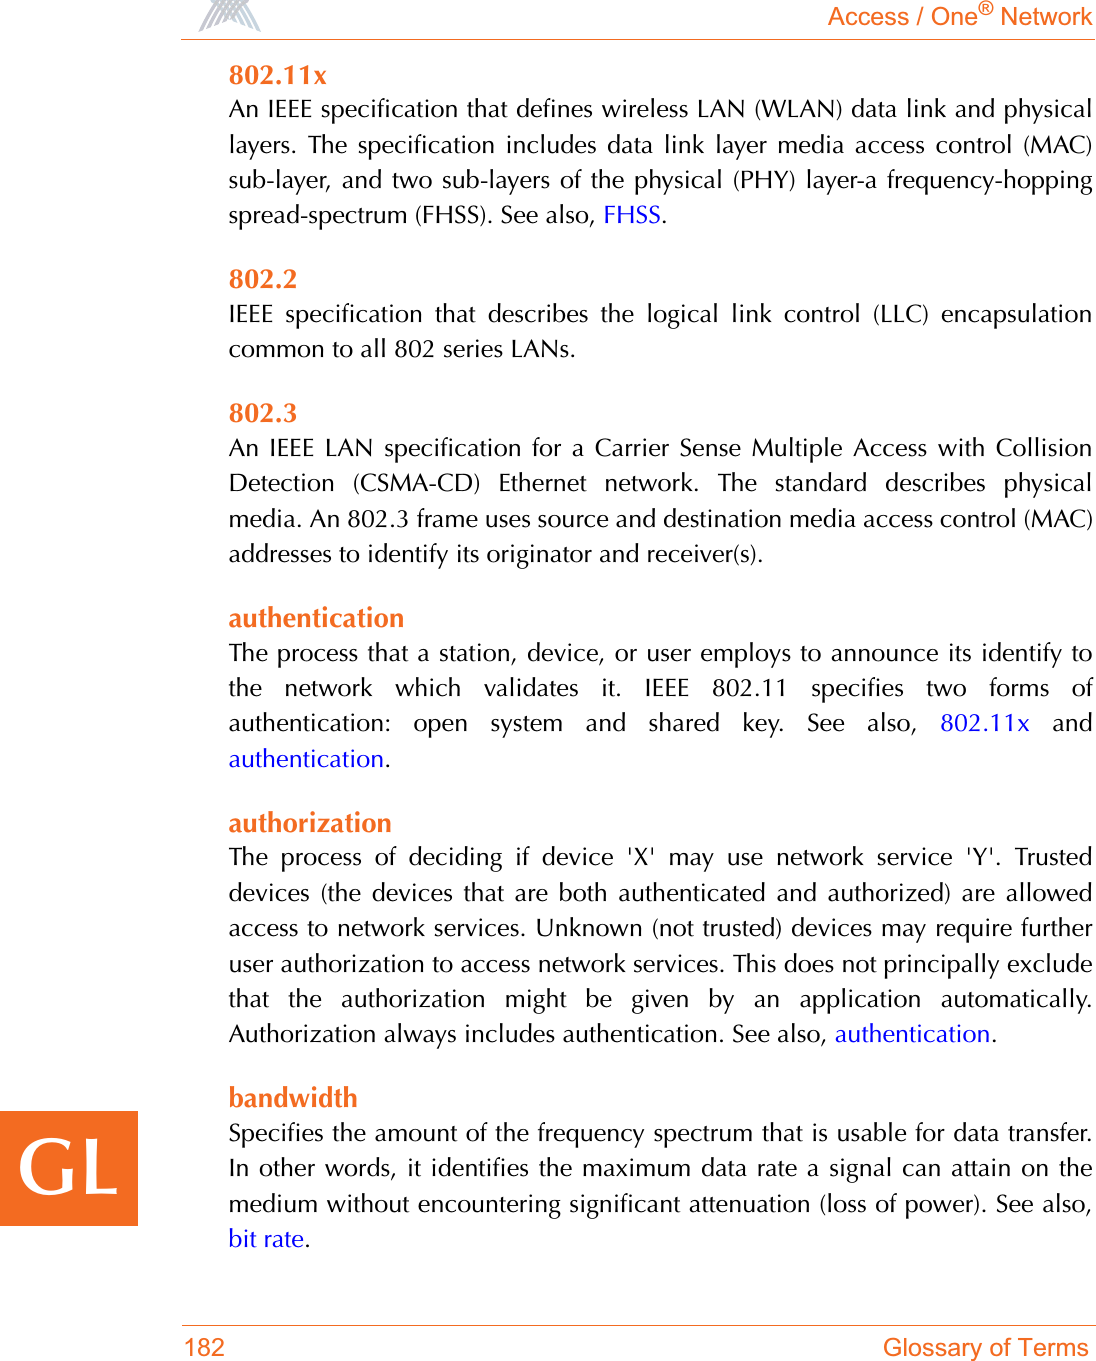 Access / One® Network182 Glossary of TermsGL802.11xAn IEEE specification that defines wireless LAN (WLAN) data link and physicallayers. The specification includes data link layer media access control (MAC)sub-layer, and two sub-layers of the physical (PHY) layer-a frequency-hoppingspread-spectrum (FHSS). See also, FHSS.802.2IEEE specification that describes the logical link control (LLC) encapsulationcommon to all 802 series LANs.802.3An IEEE LAN specification for a Carrier Sense Multiple Access with CollisionDetection (CSMA-CD) Ethernet network. The standard describes physicalmedia. An 802.3 frame uses source and destination media access control (MAC)addresses to identify its originator and receiver(s).authenticationThe process that a station, device, or user employs to announce its identify tothe network which validates it. IEEE 802.11 specifies two forms ofauthentication: open system and shared key. See also, 802.11x andauthentication.authorizationThe process of deciding if device &apos;X&apos; may use network service &apos;Y&apos;. Trusteddevices (the devices that are both authenticated and authorized) are allowedaccess to network services. Unknown (not trusted) devices may require furtheruser authorization to access network services. This does not principally excludethat the authorization might be given by an application automatically.Authorization always includes authentication. See also, authentication.bandwidthSpecifies the amount of the frequency spectrum that is usable for data transfer.In other words, it identifies the maximum data rate a signal can attain on themedium without encountering significant attenuation (loss of power). See also,bit rate.